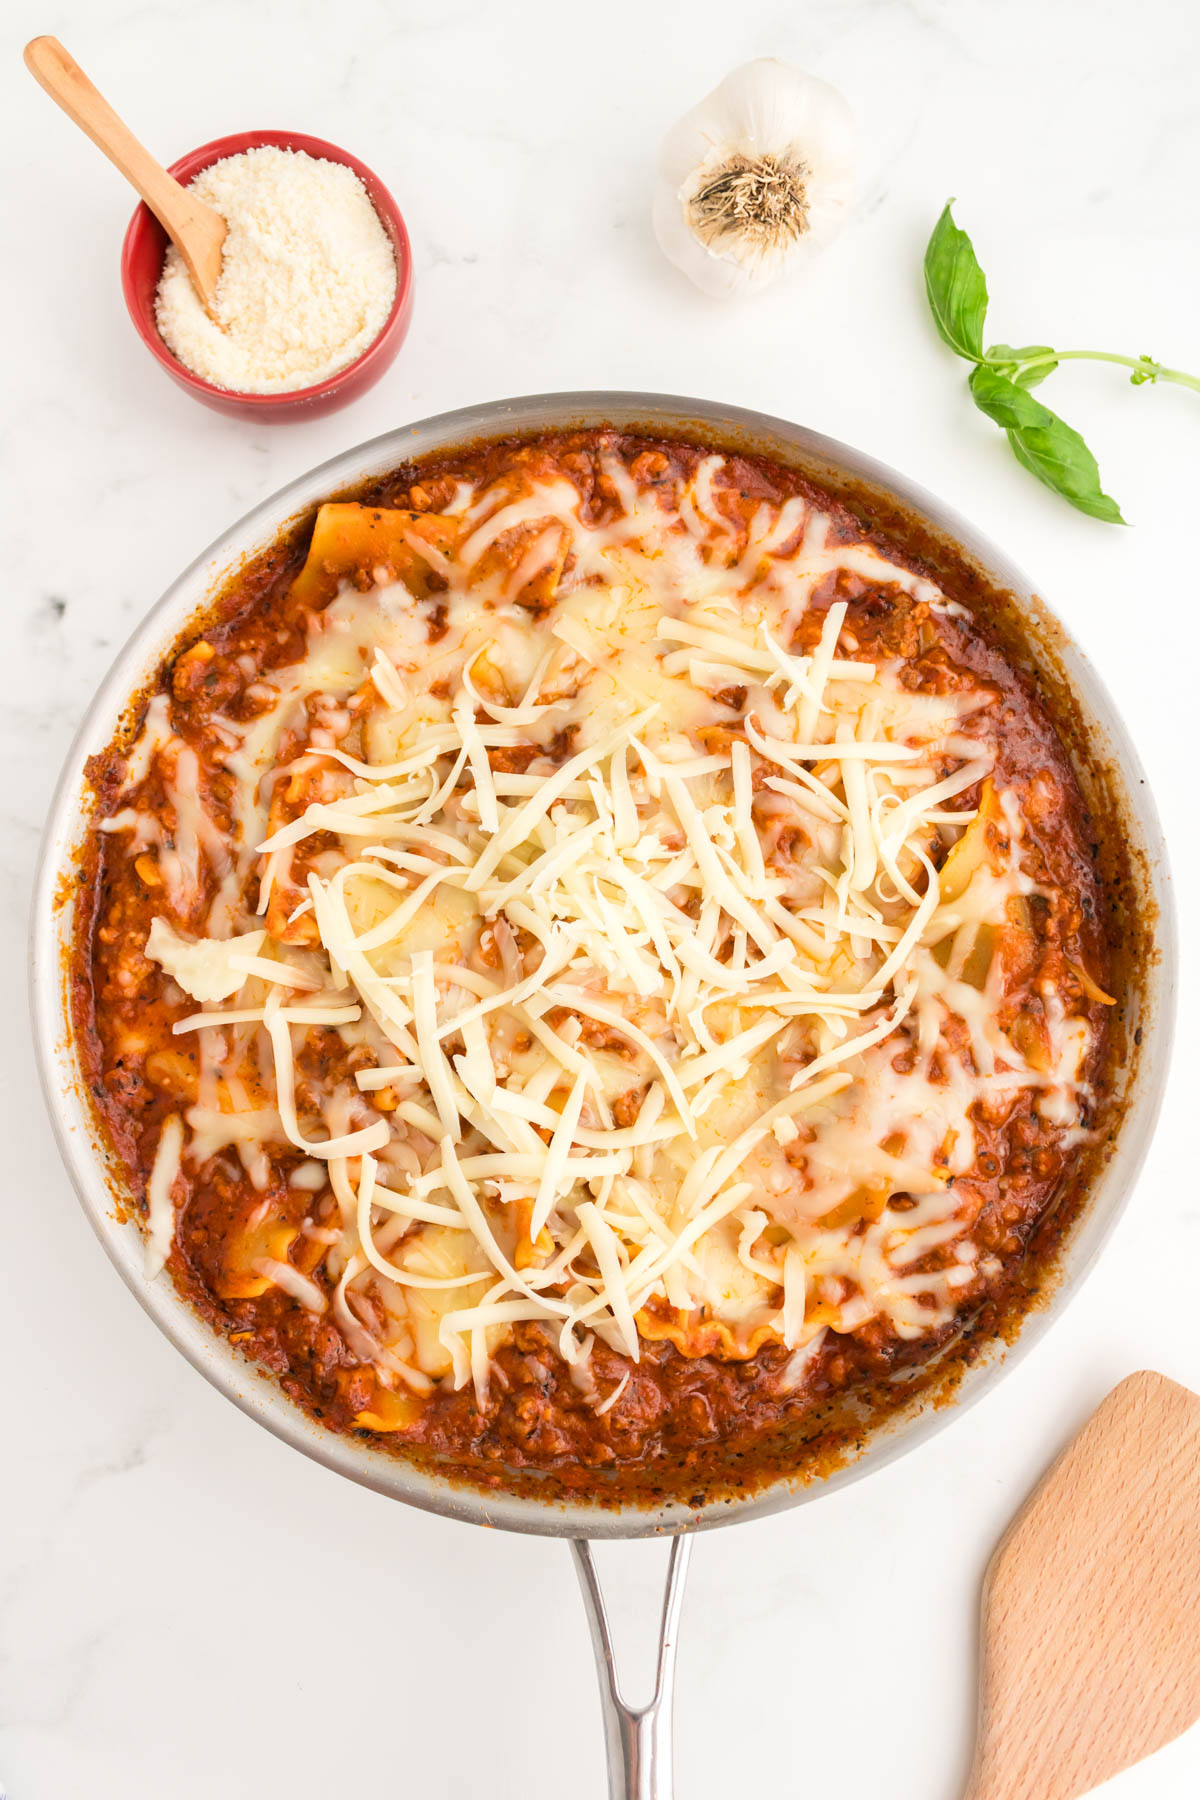 An overhead view of a skillet with meat sauce and noodles, topped with cheese in various stages of melting. A bowl of parmesan cheese, a garlic clove, and a basil leaf are visible above the skillet. 